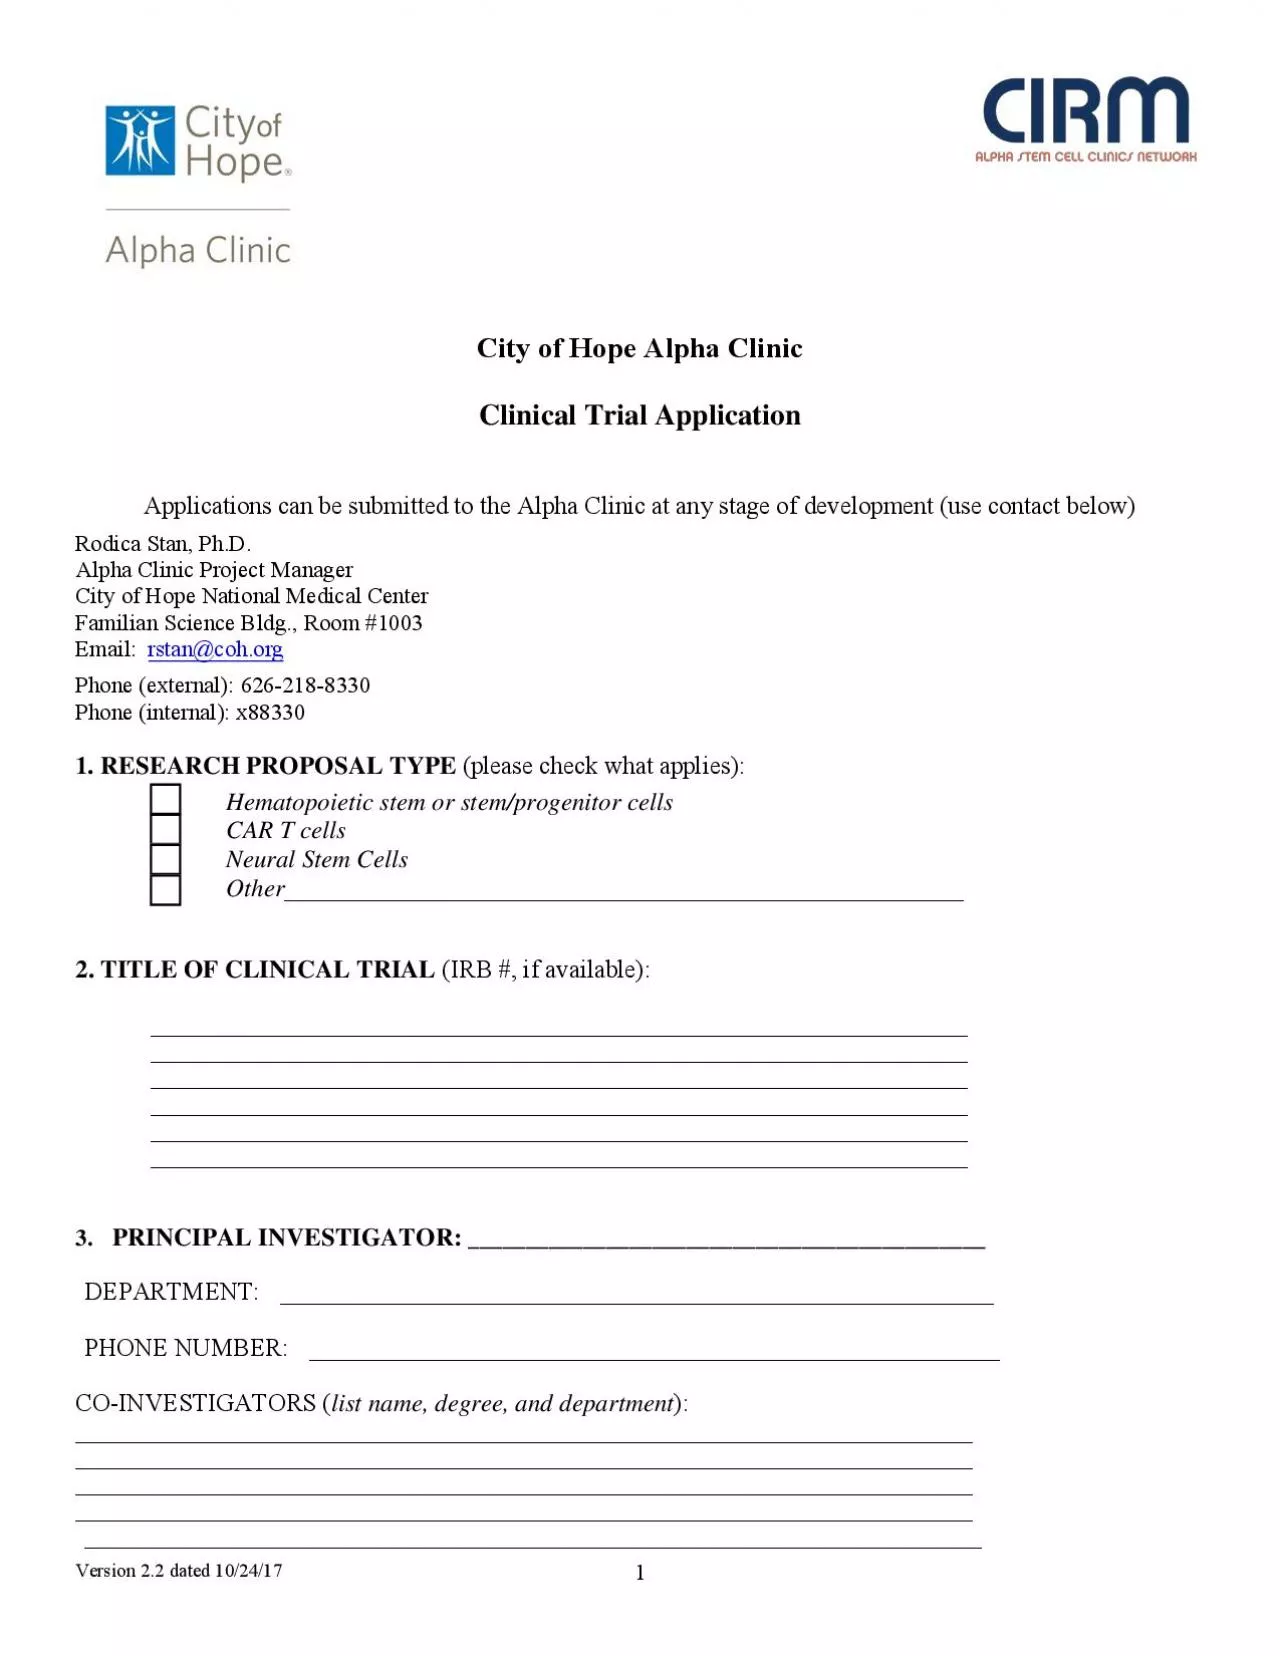 City of Hope Alpha ClinicClinical Trial ApplicationApplications an be